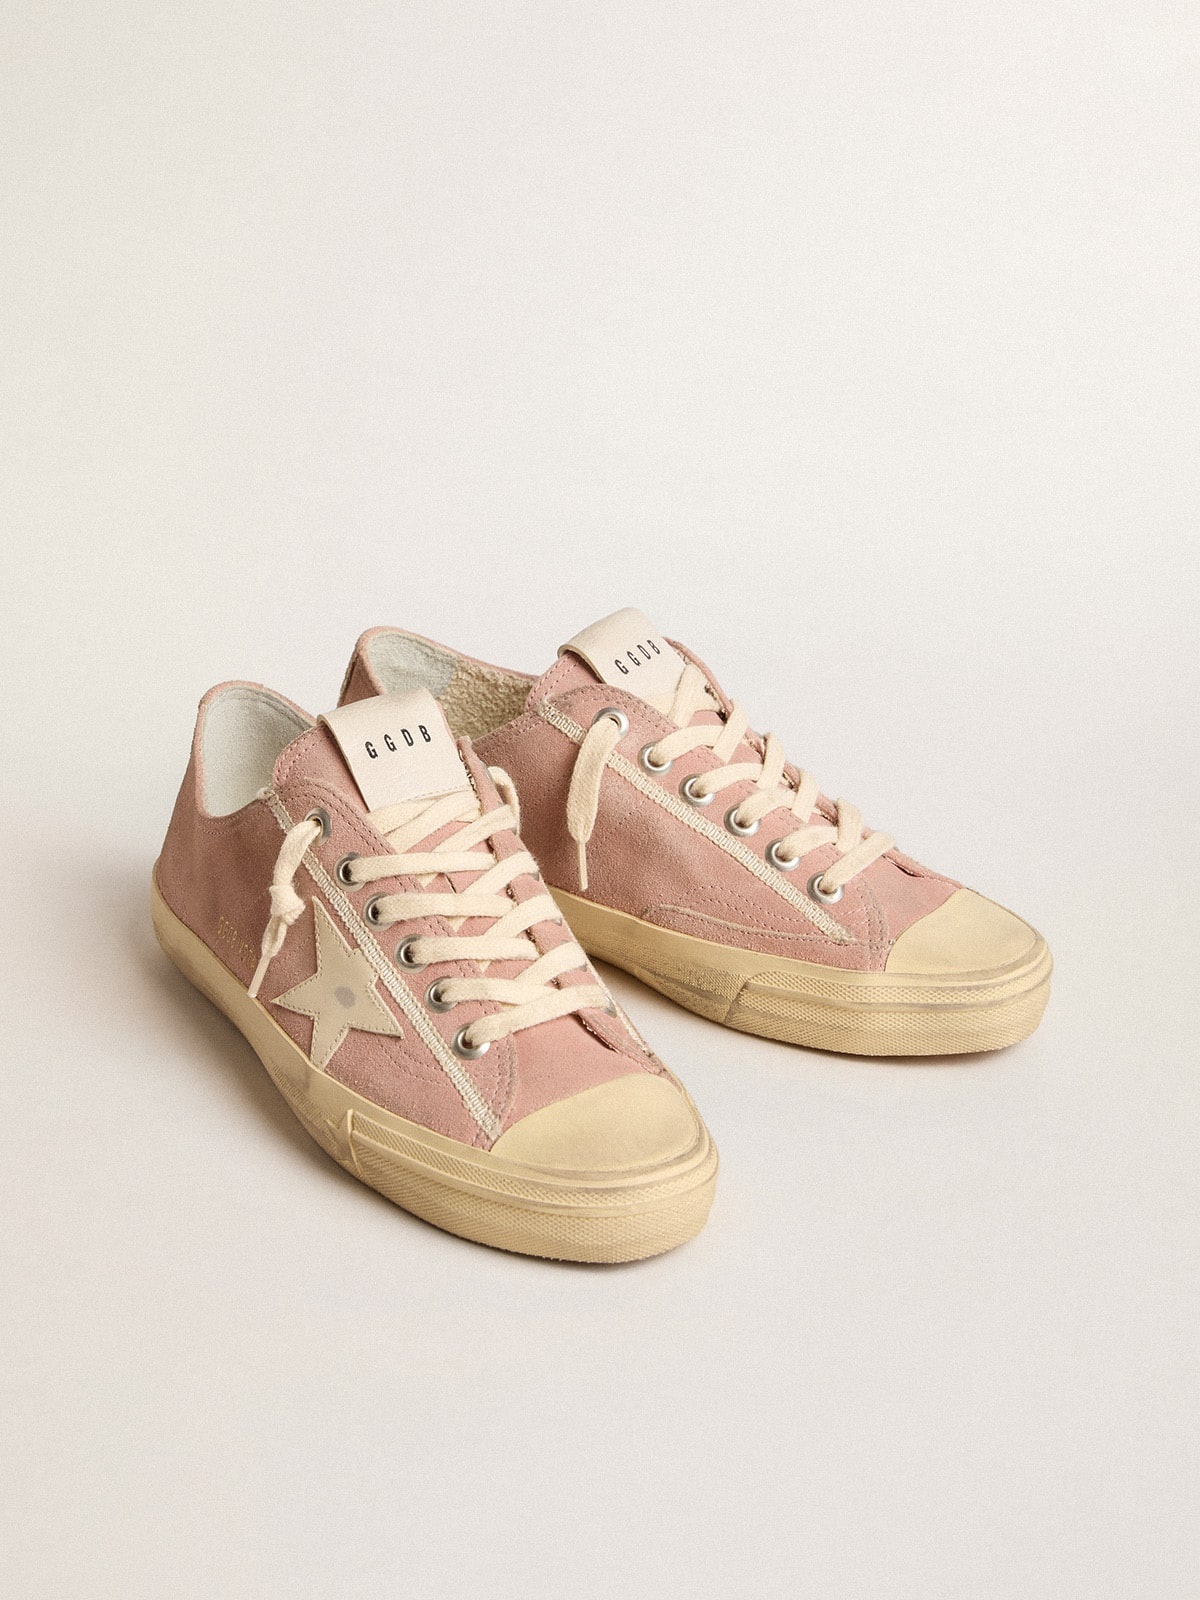 V-Star in pink suede with cream leather star - 2